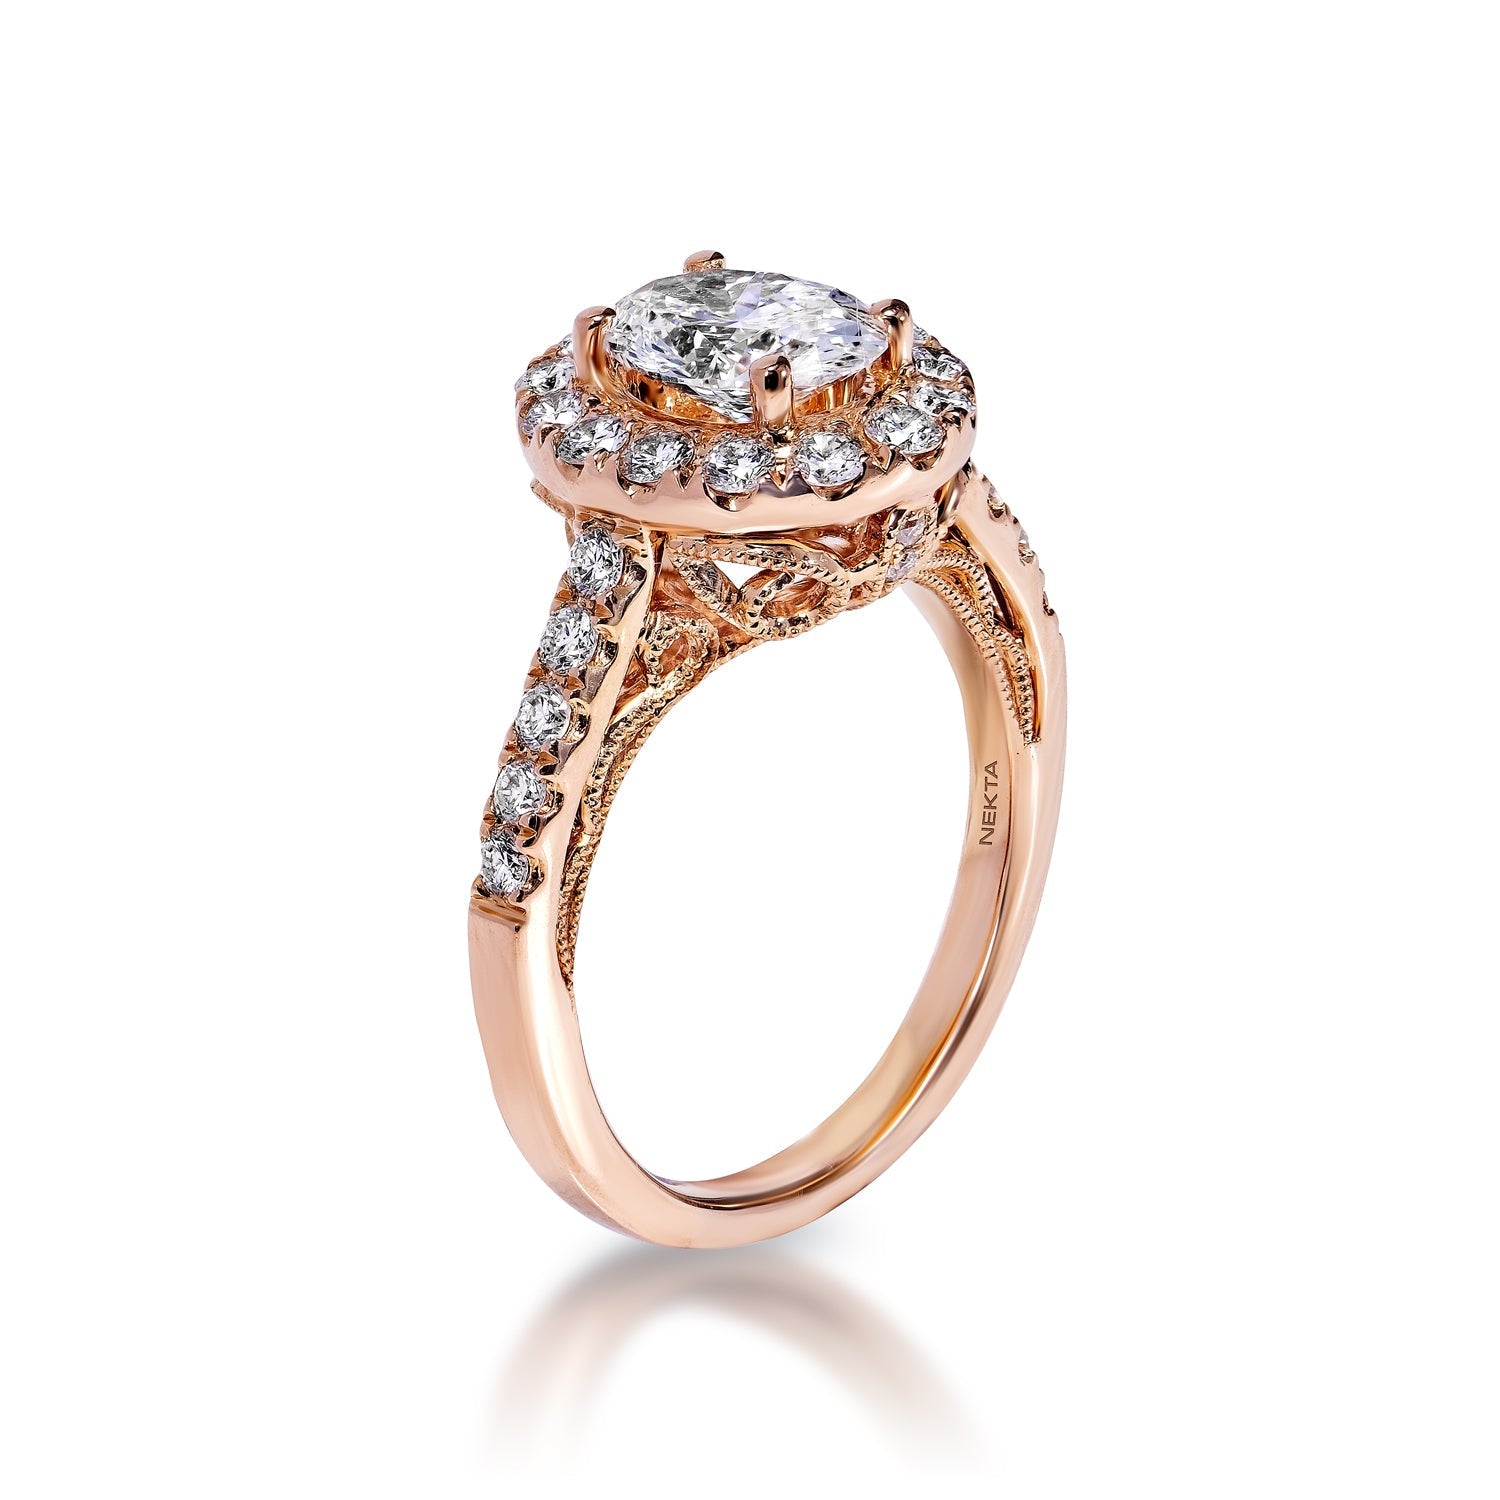 Lilac 2 Carat E VVS2 Oval Cut Lab Grown Diamond Engagement Ring in 18k Rose Gold Side View